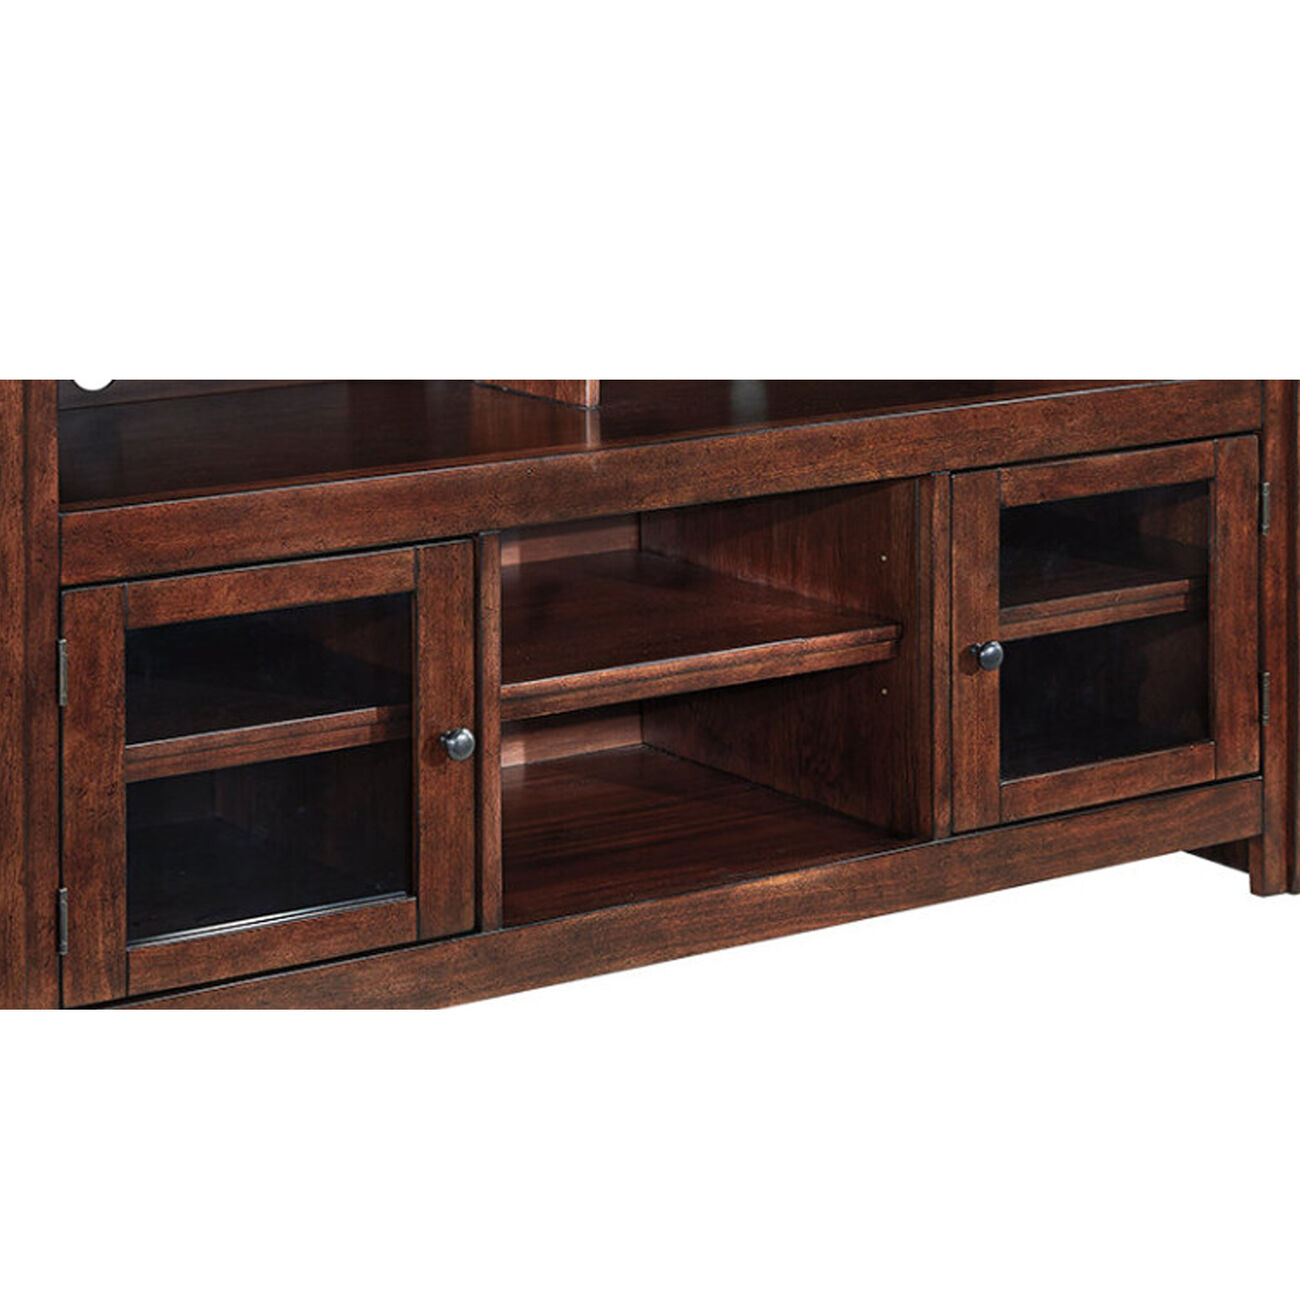 Wooden TV Stand with Two Glass Inserted Door Cabinets and Open Shelves, Large, Brown